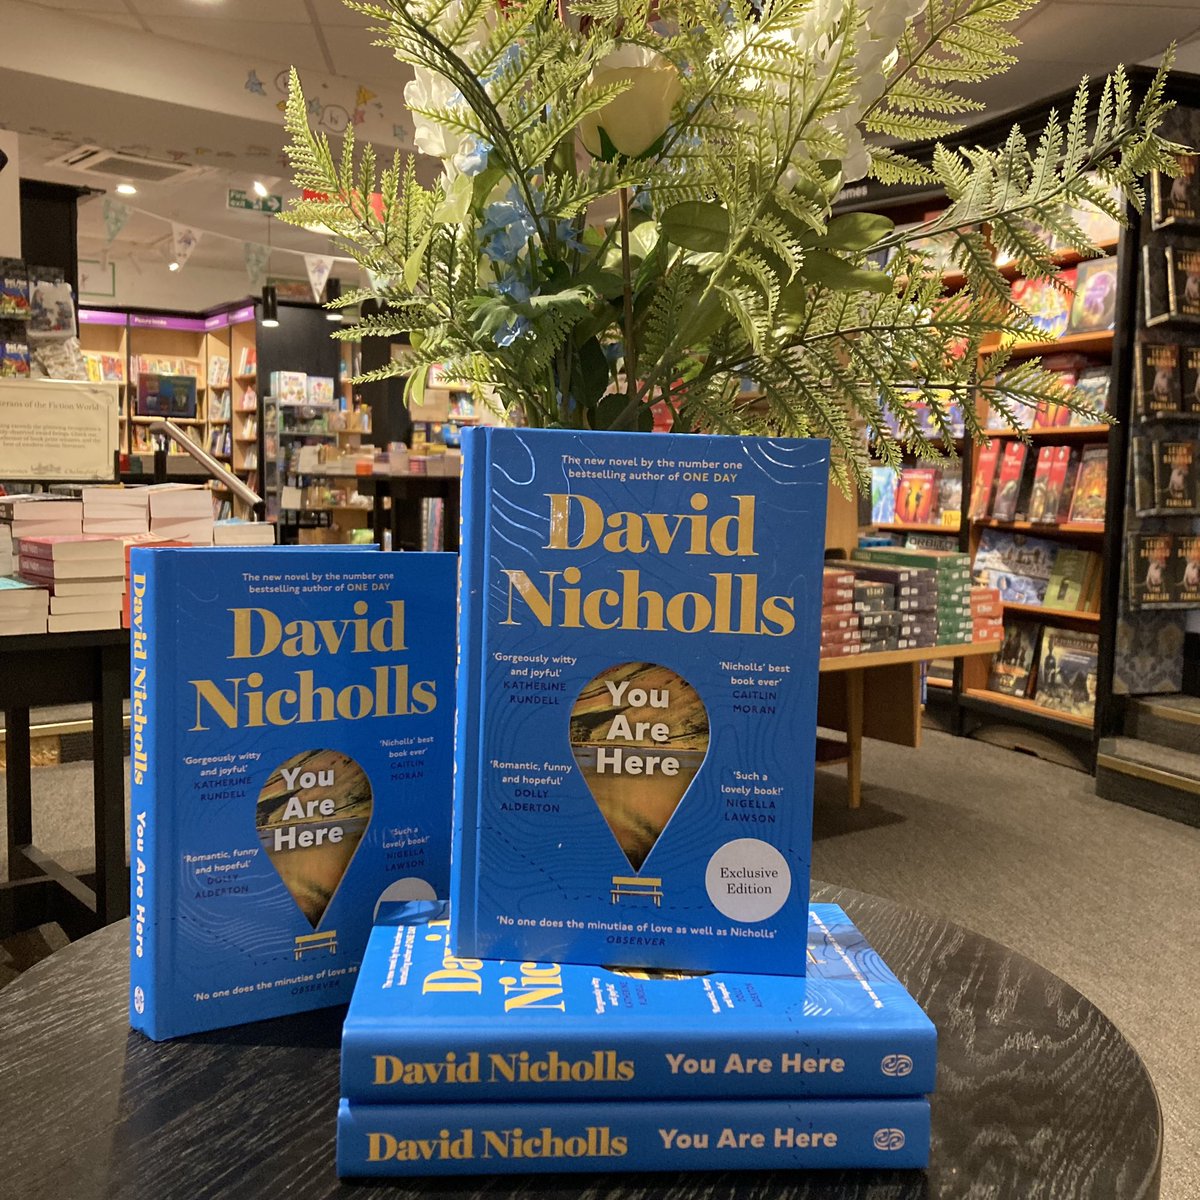 Already bored of looking for various letters on your keyboard? (We are) Maybe look between the covers of the new @DavidNWriter instead and discover something glorious that will stay with you a lot longer than a meme. ‘You Are Here’ is touching, funny and beautiful.